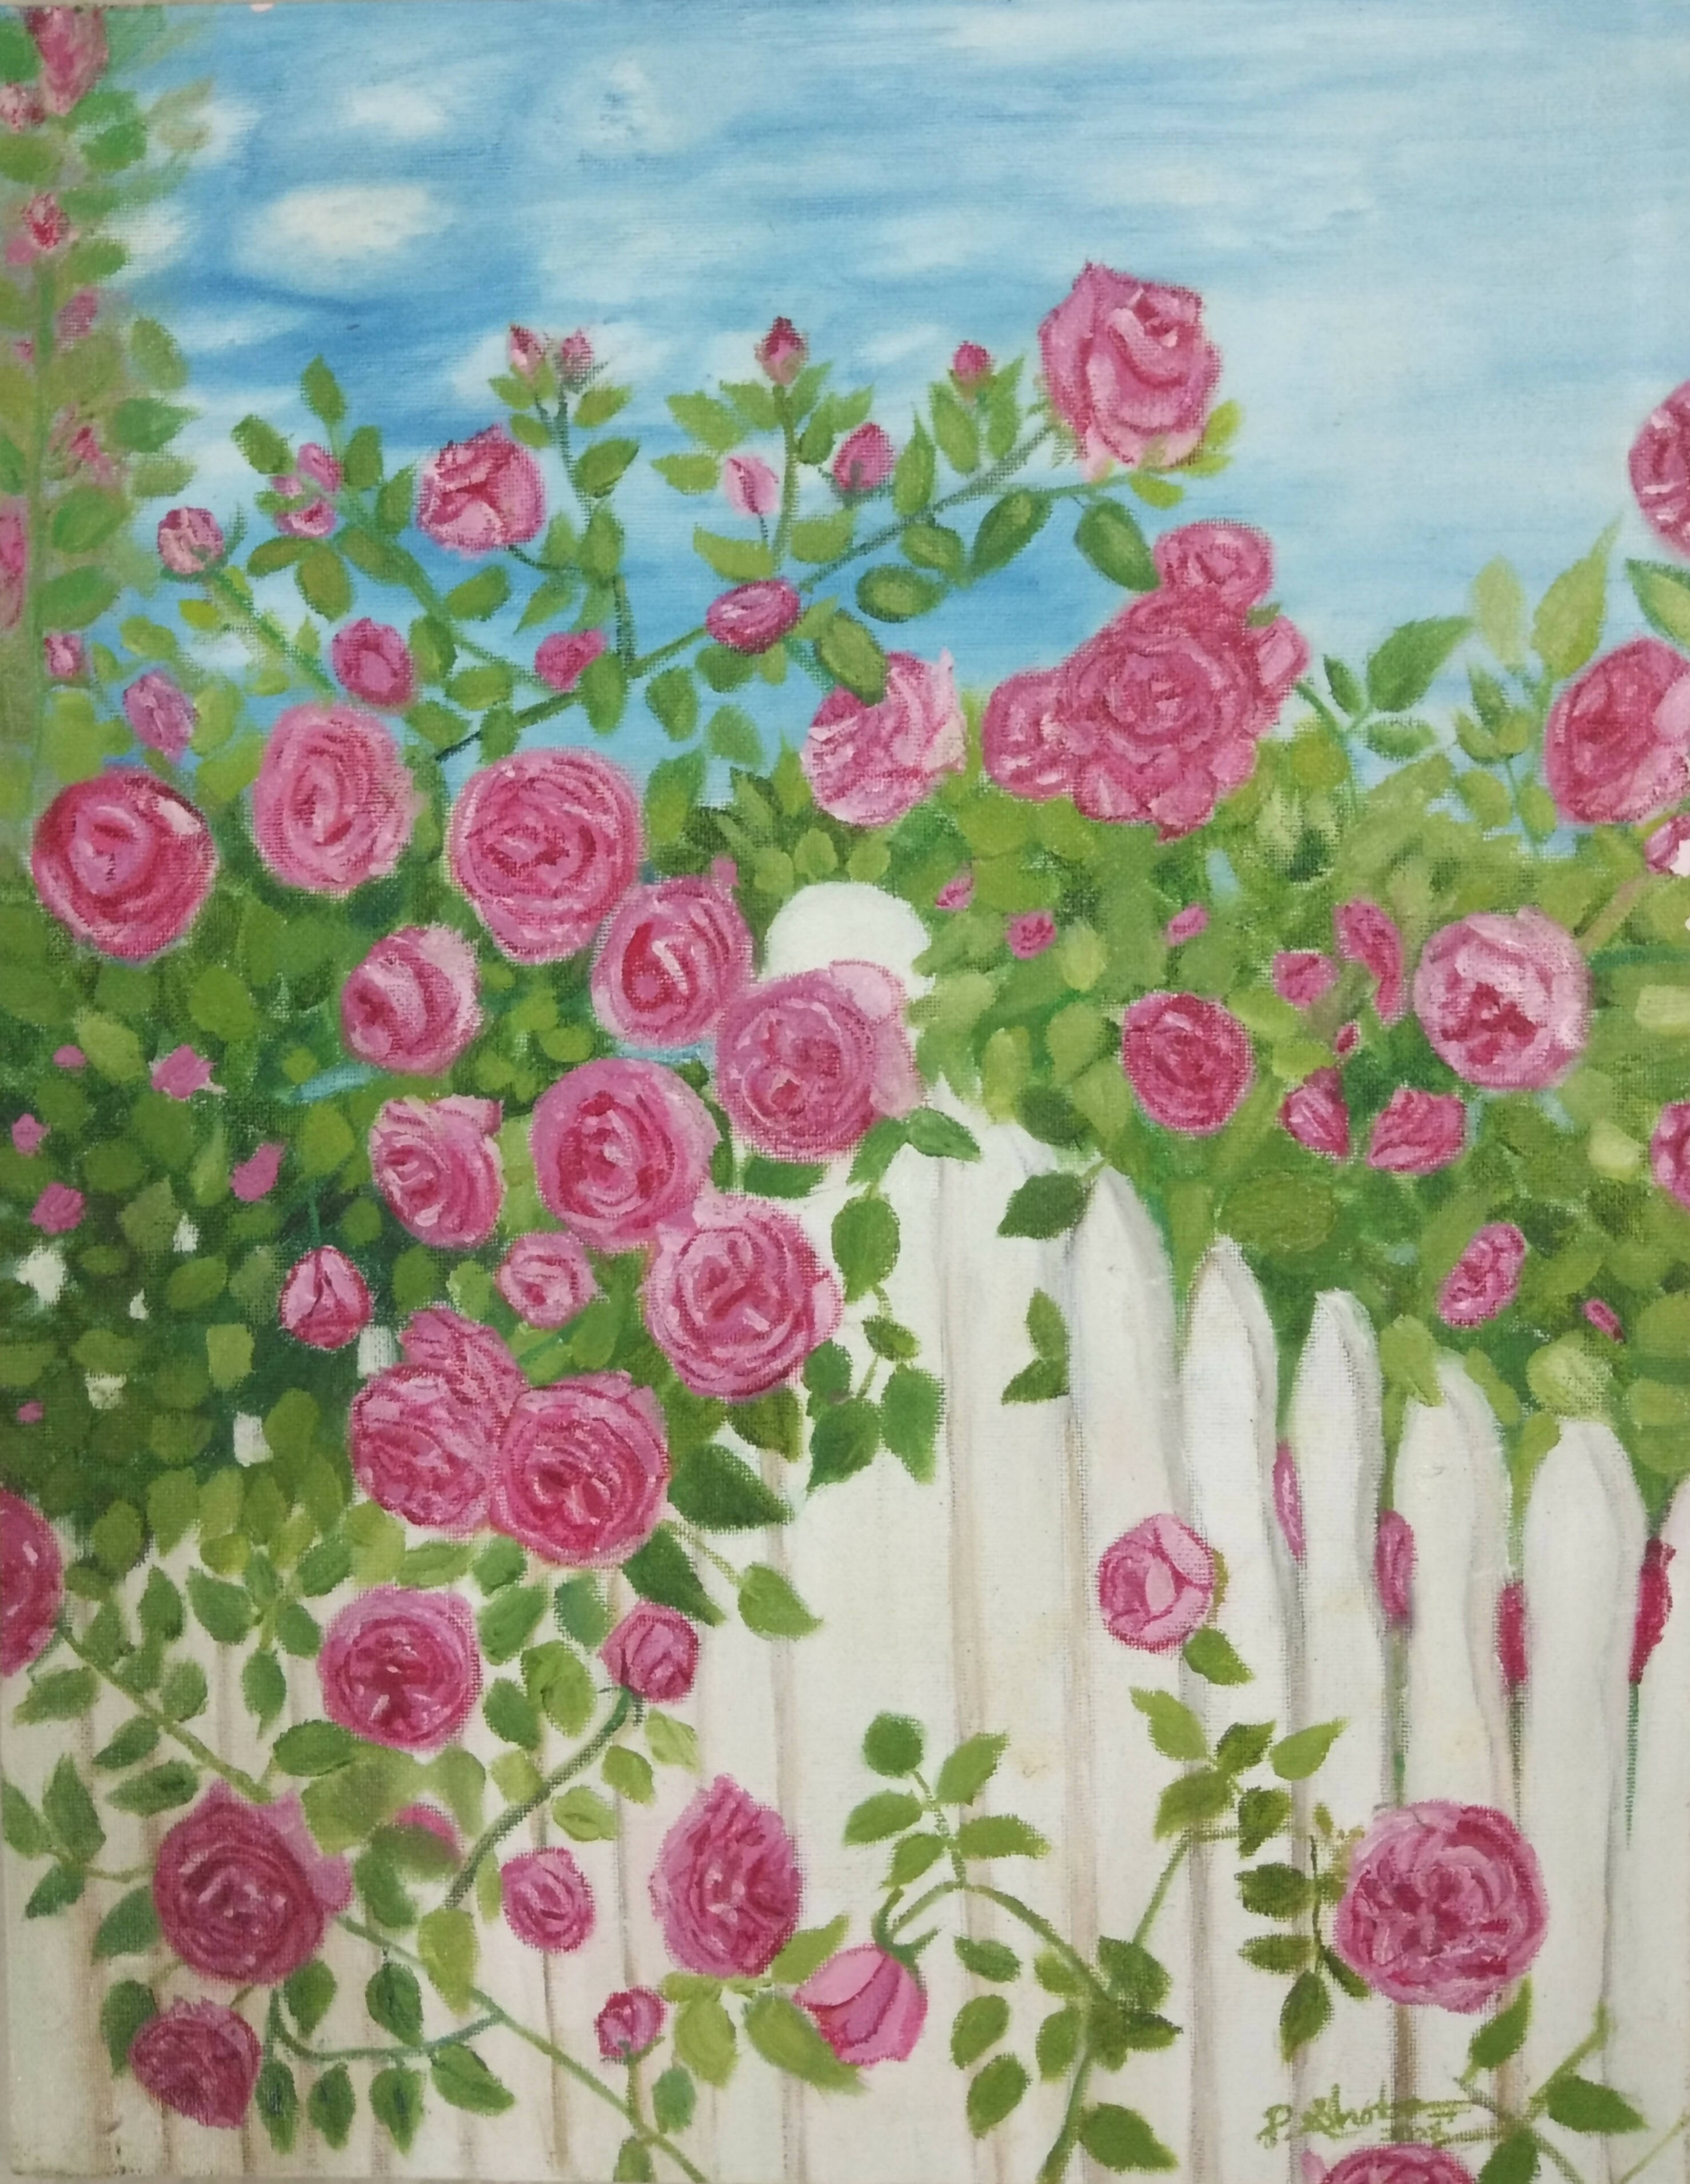 Fence of roses